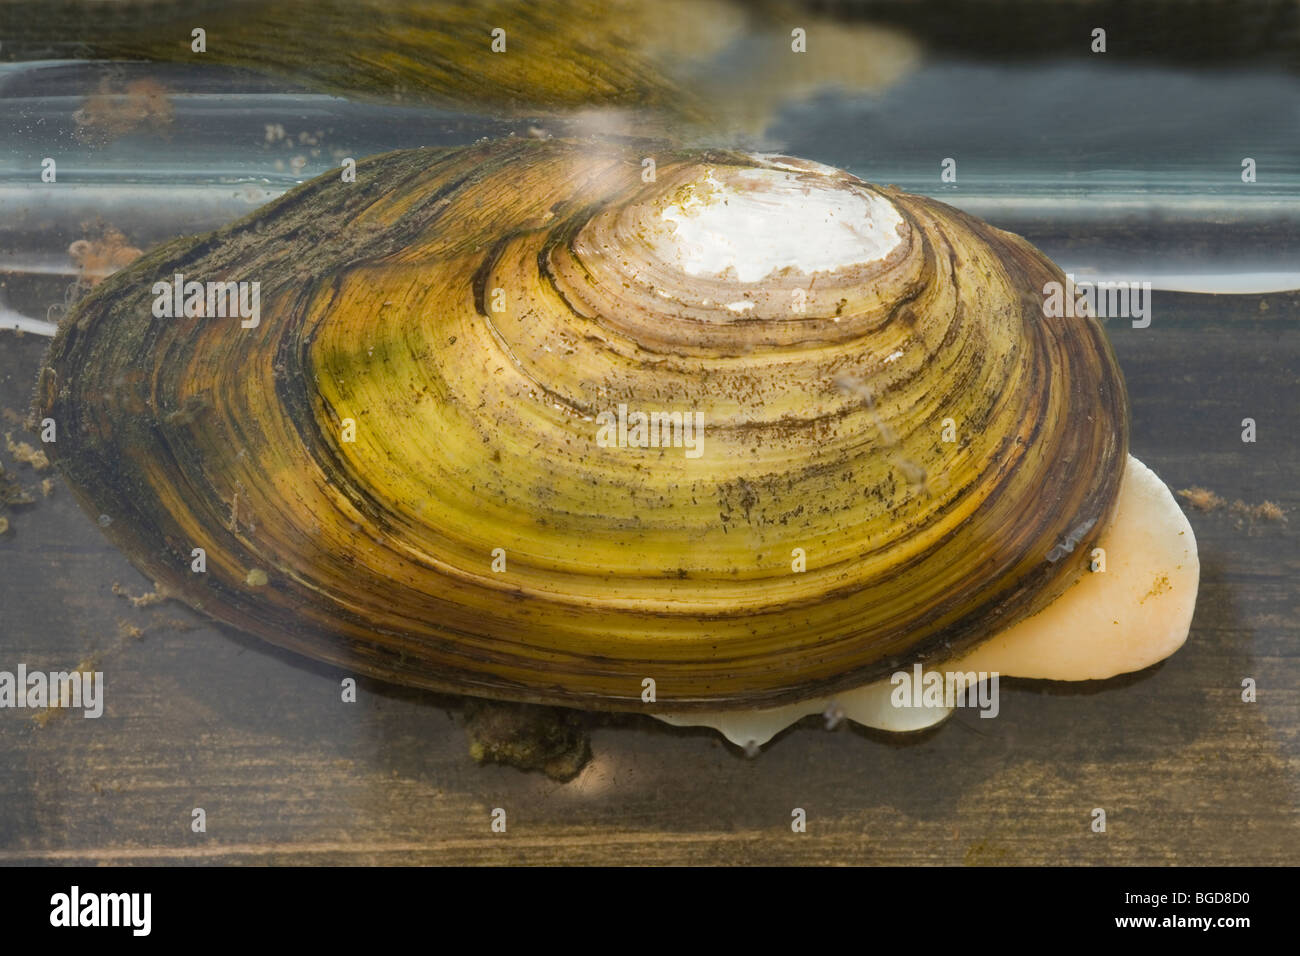 Swan Mussel Anodonta cygnea. In an aquarium, with partial extension of 'foot'. Caught in a pond dipping net. Norfolk, England. Stock Photo